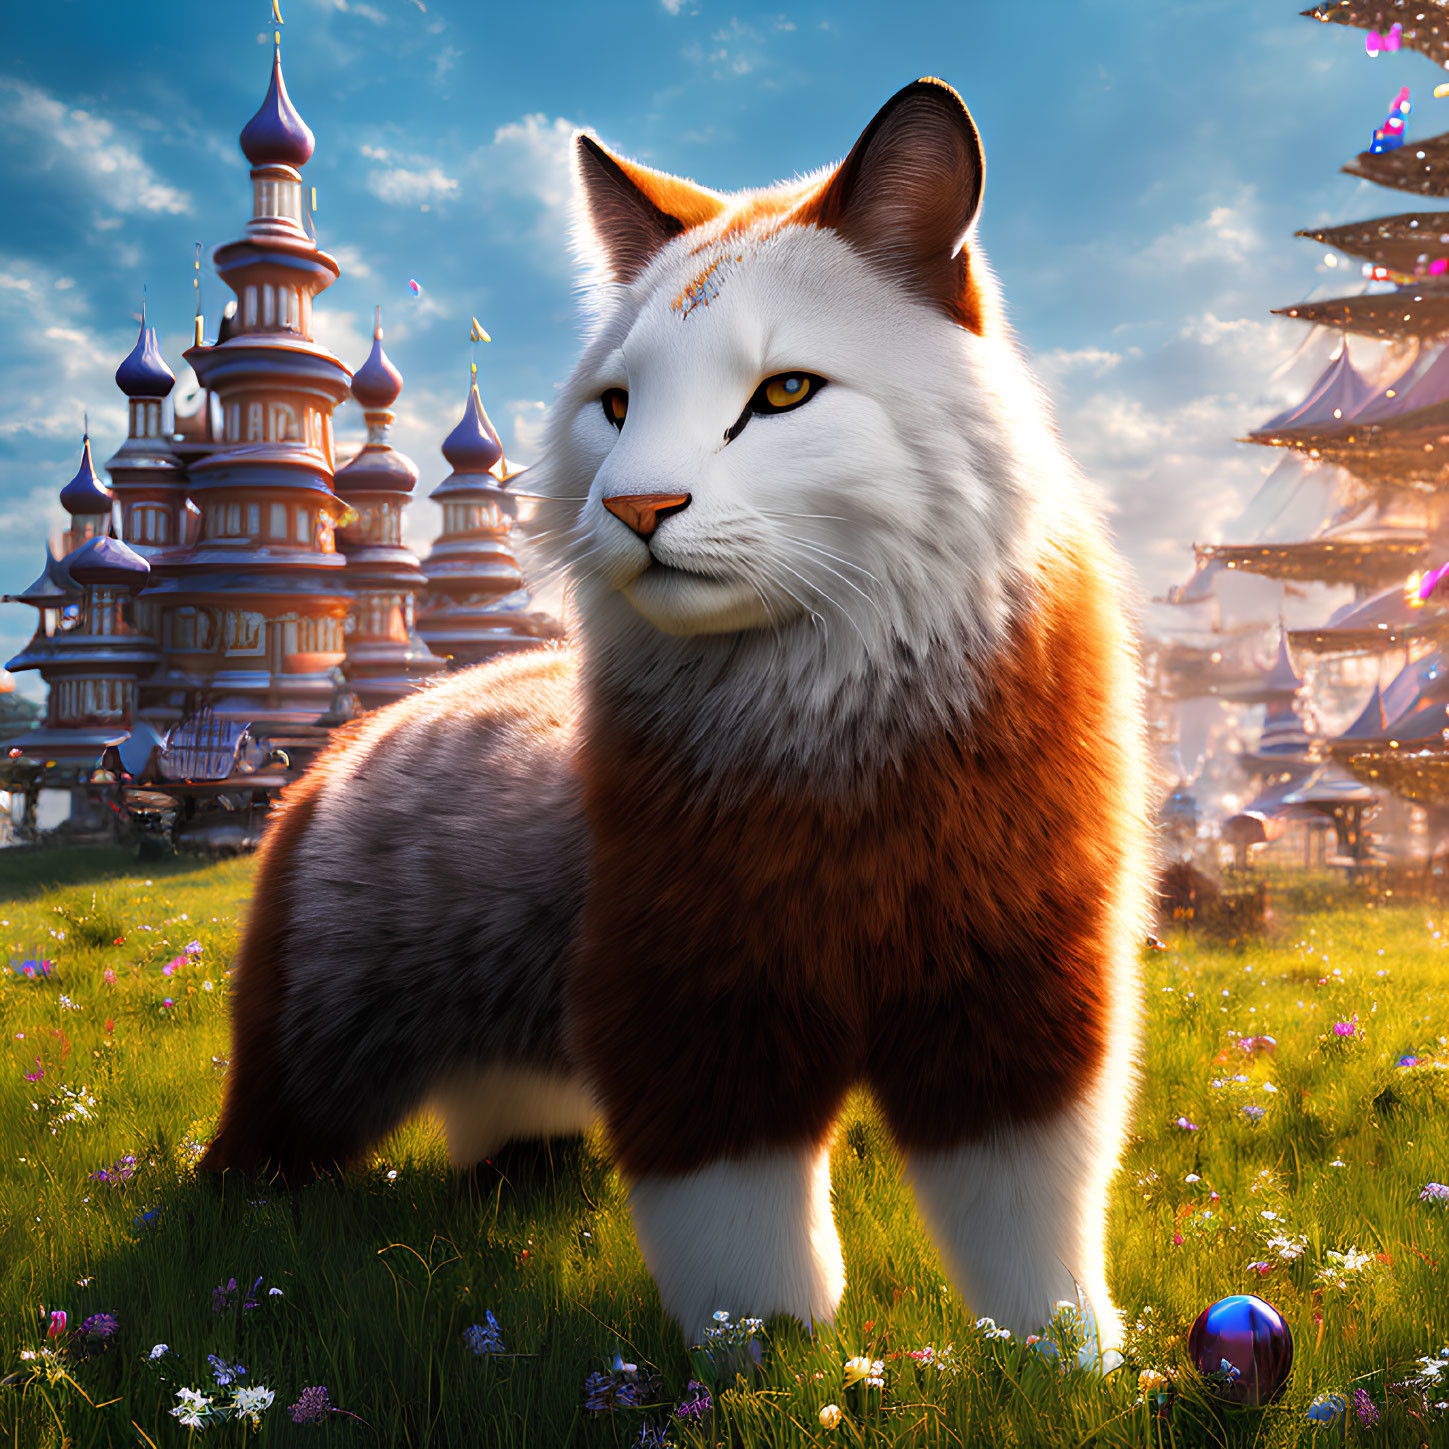 Fluffy white and ginger cat in fantastical field with towers under blue sky